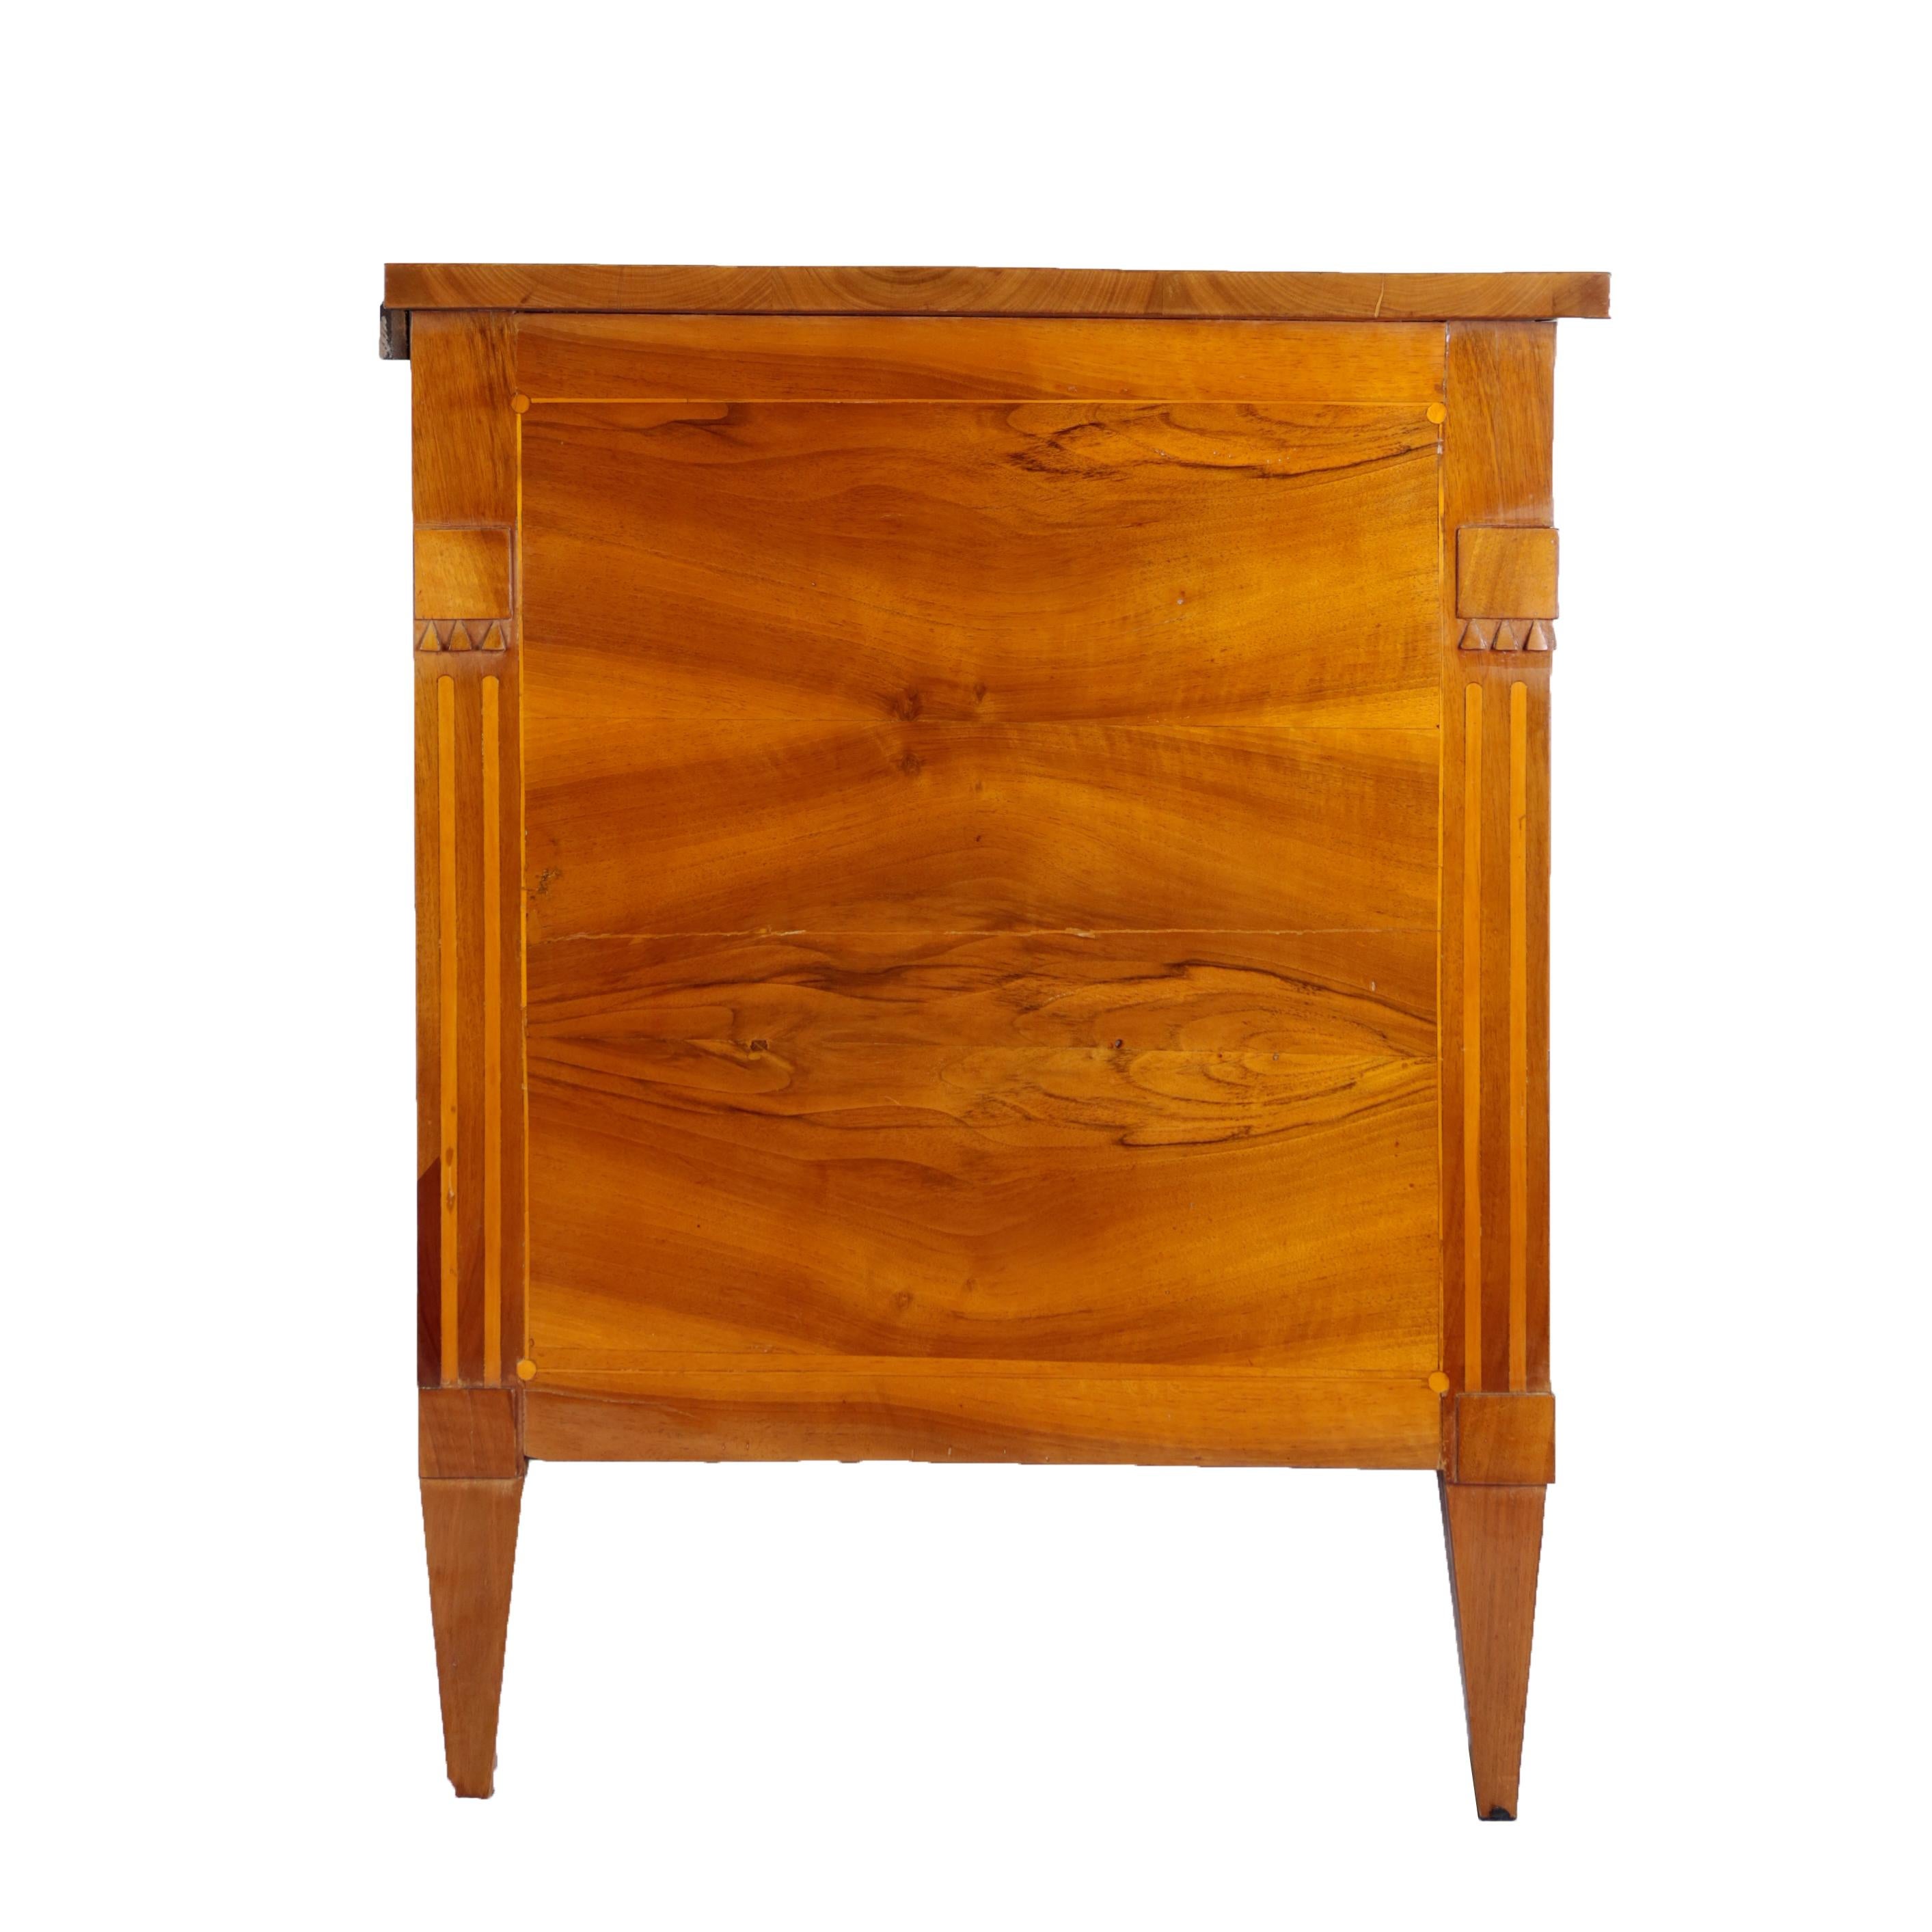 Veneer Late 18th Century Louis Seize Chest of Drawers, circa 1780, Walnut and Nutroot